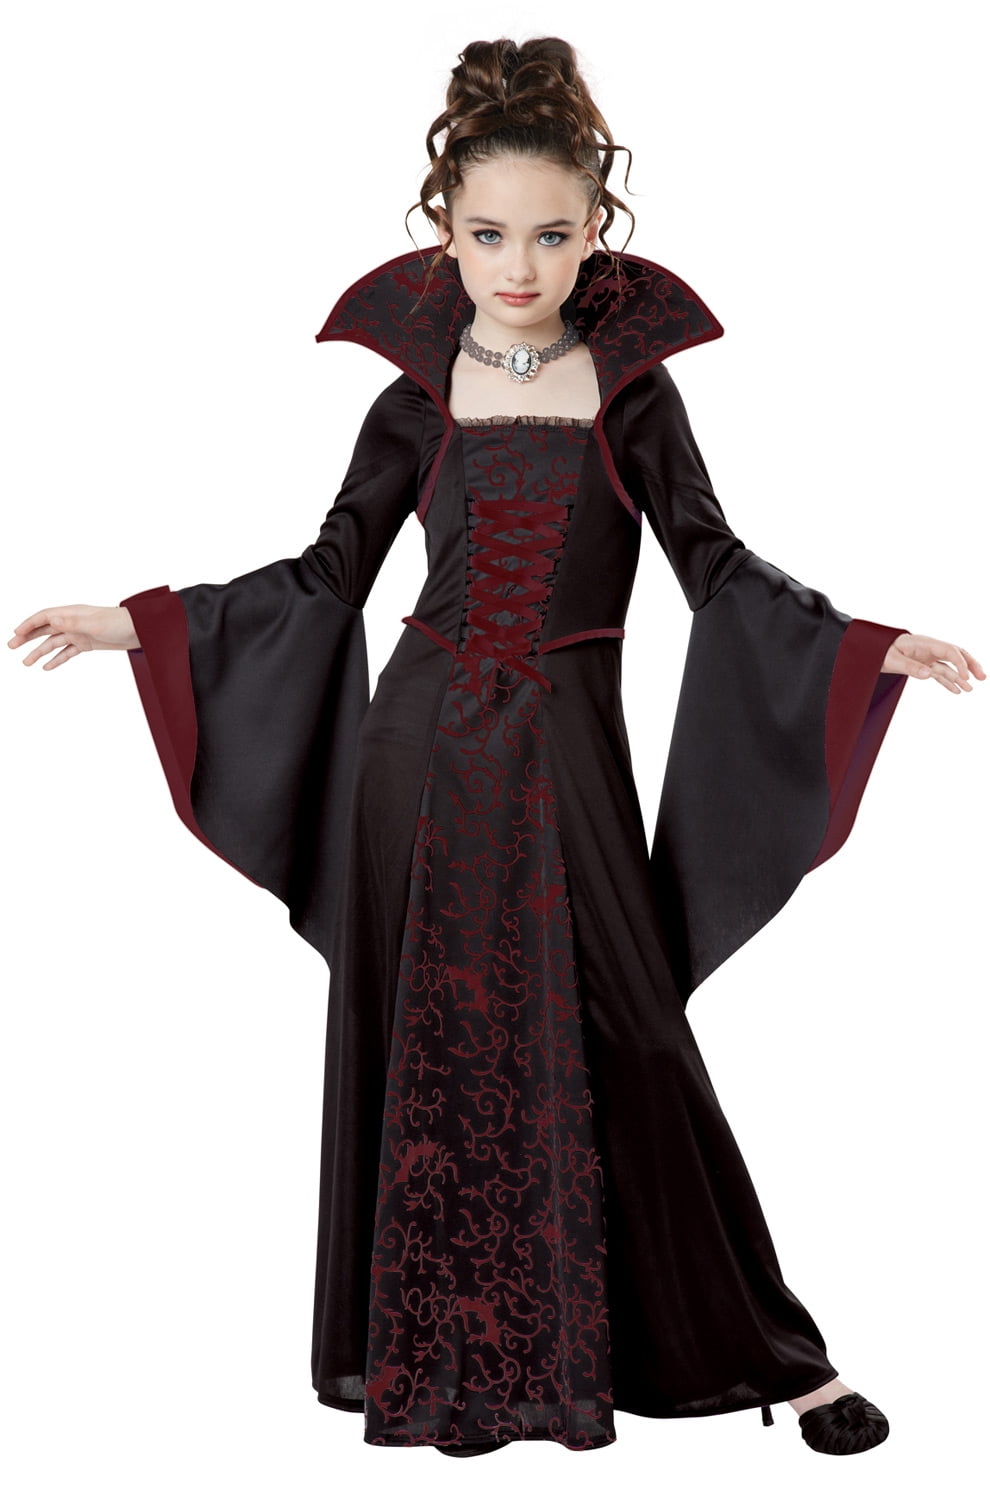 Children's Vampire Fancy Dress Halloween Costume with Mask Aged 8-10 Years 